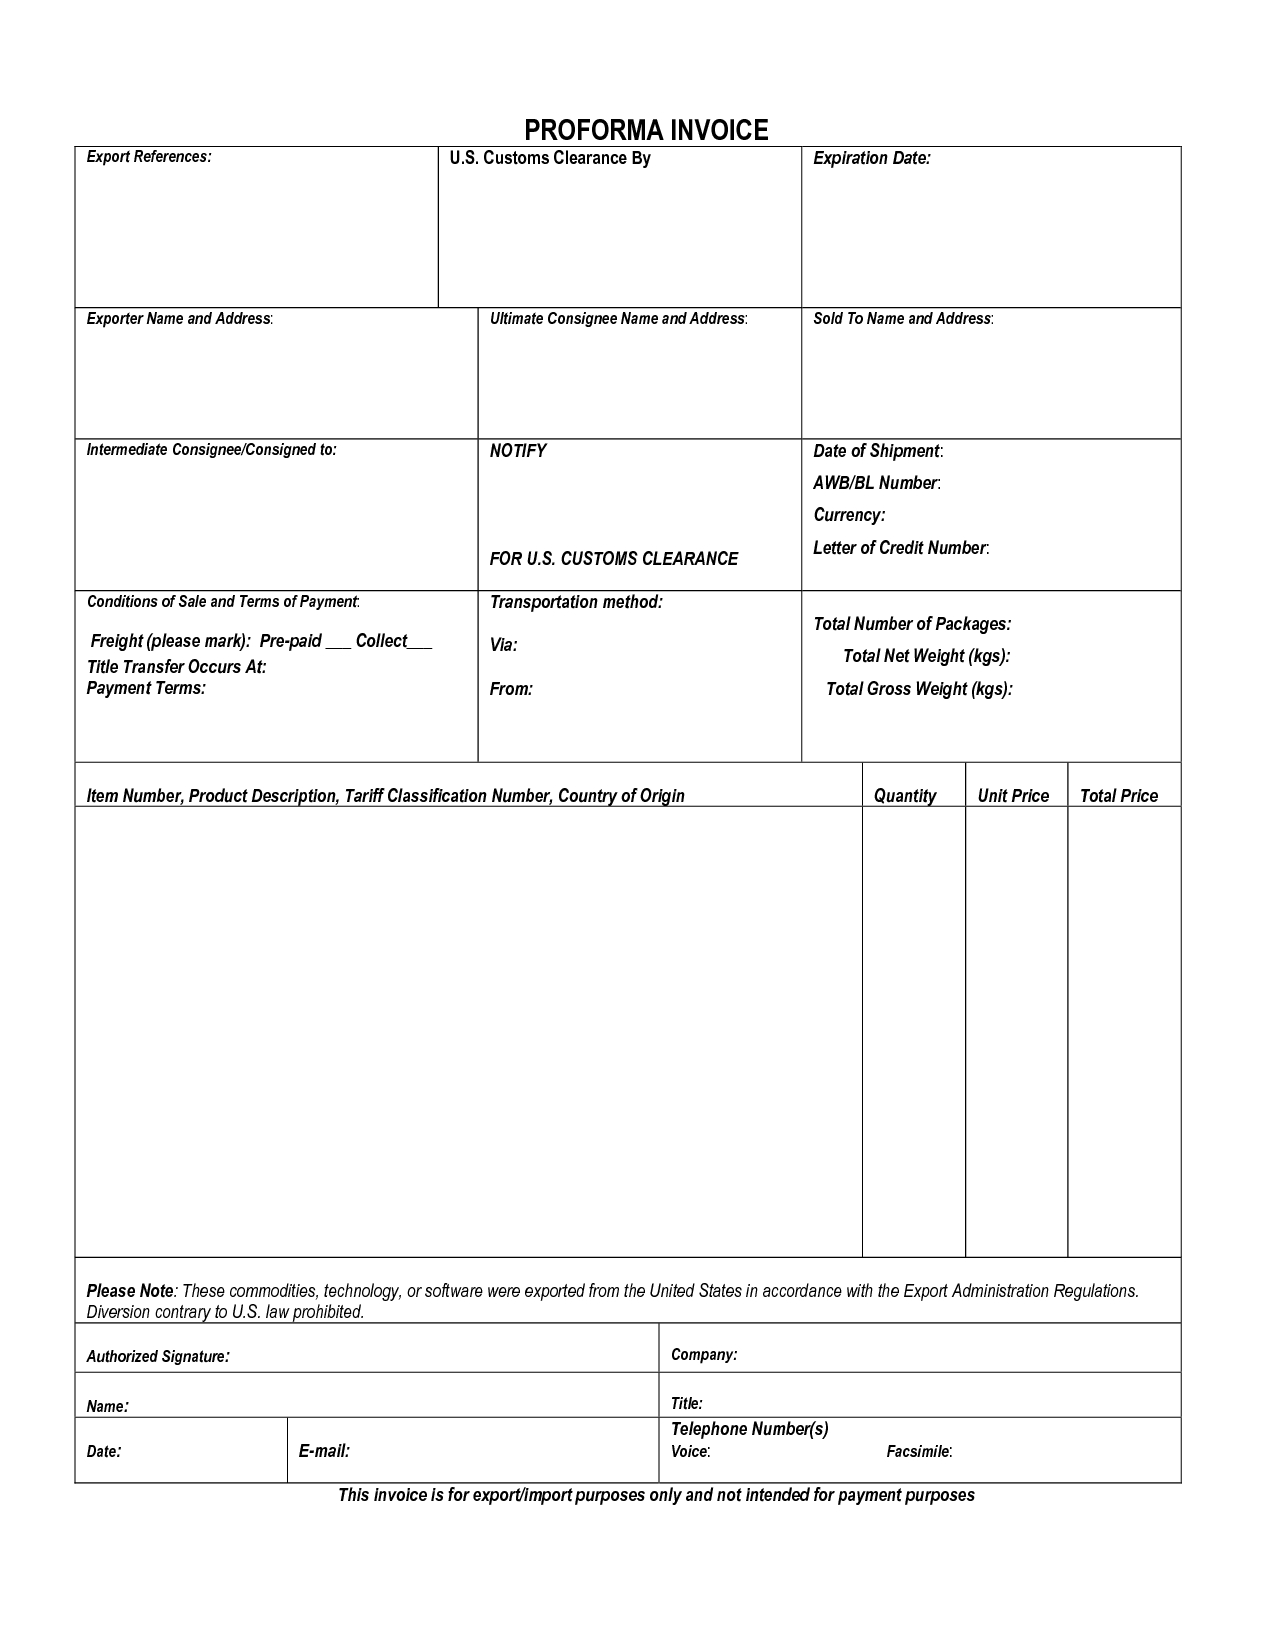 sales invoice definition cv template standard professional credit invoice definition